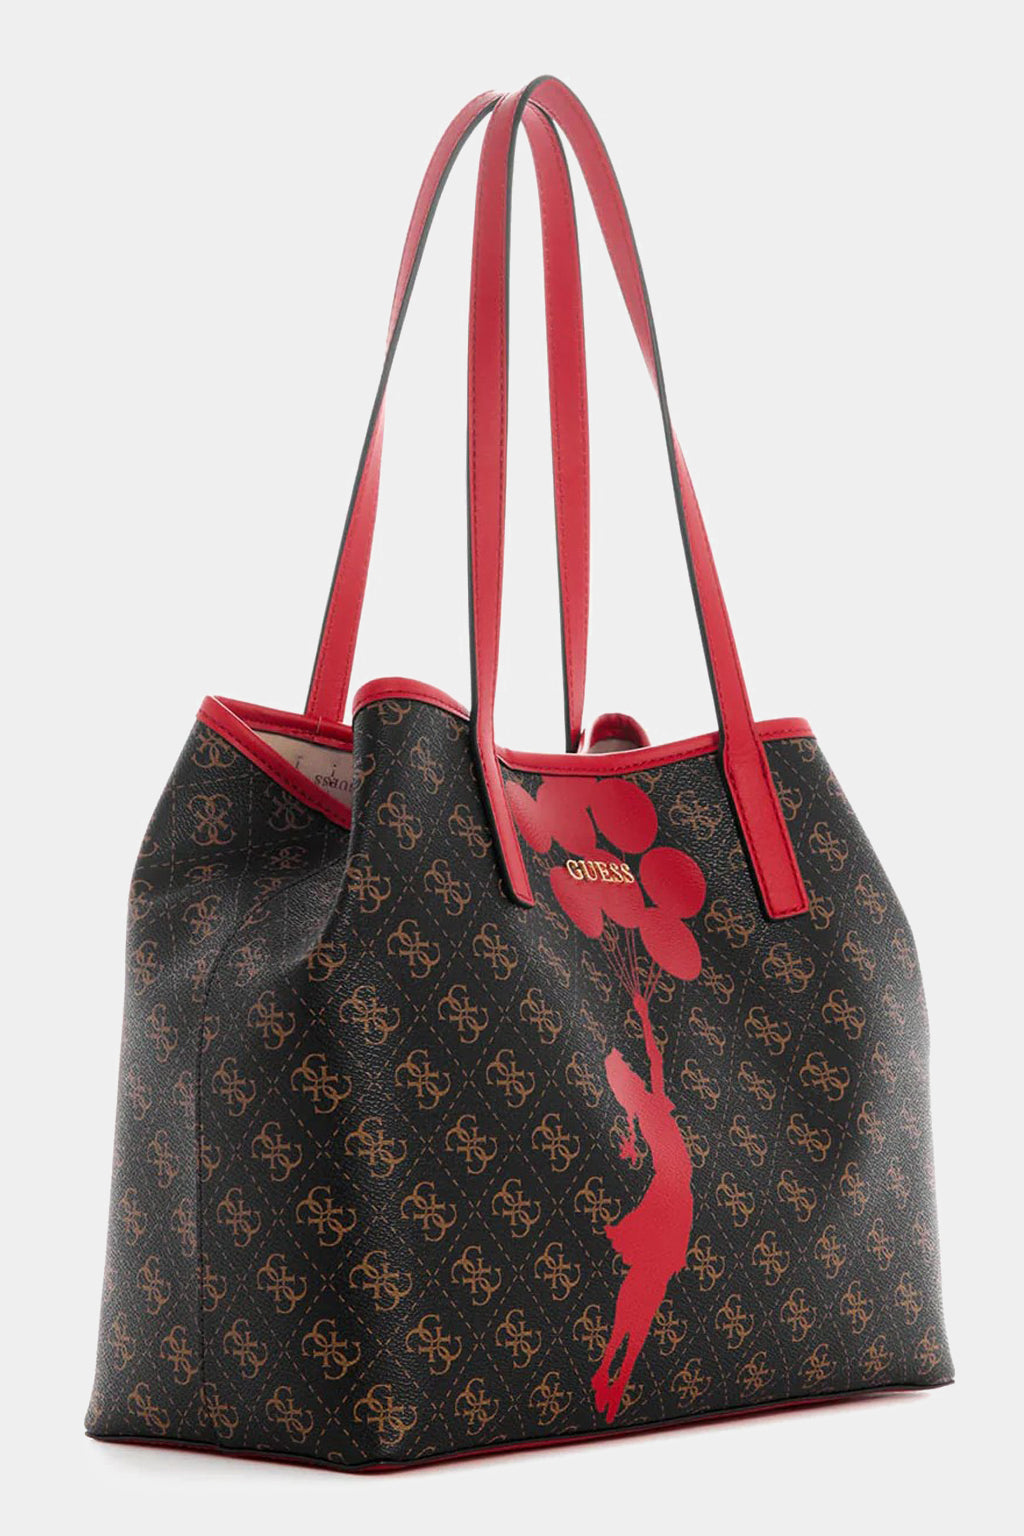 Guess - Brown Girl With Balloons Tote Bag